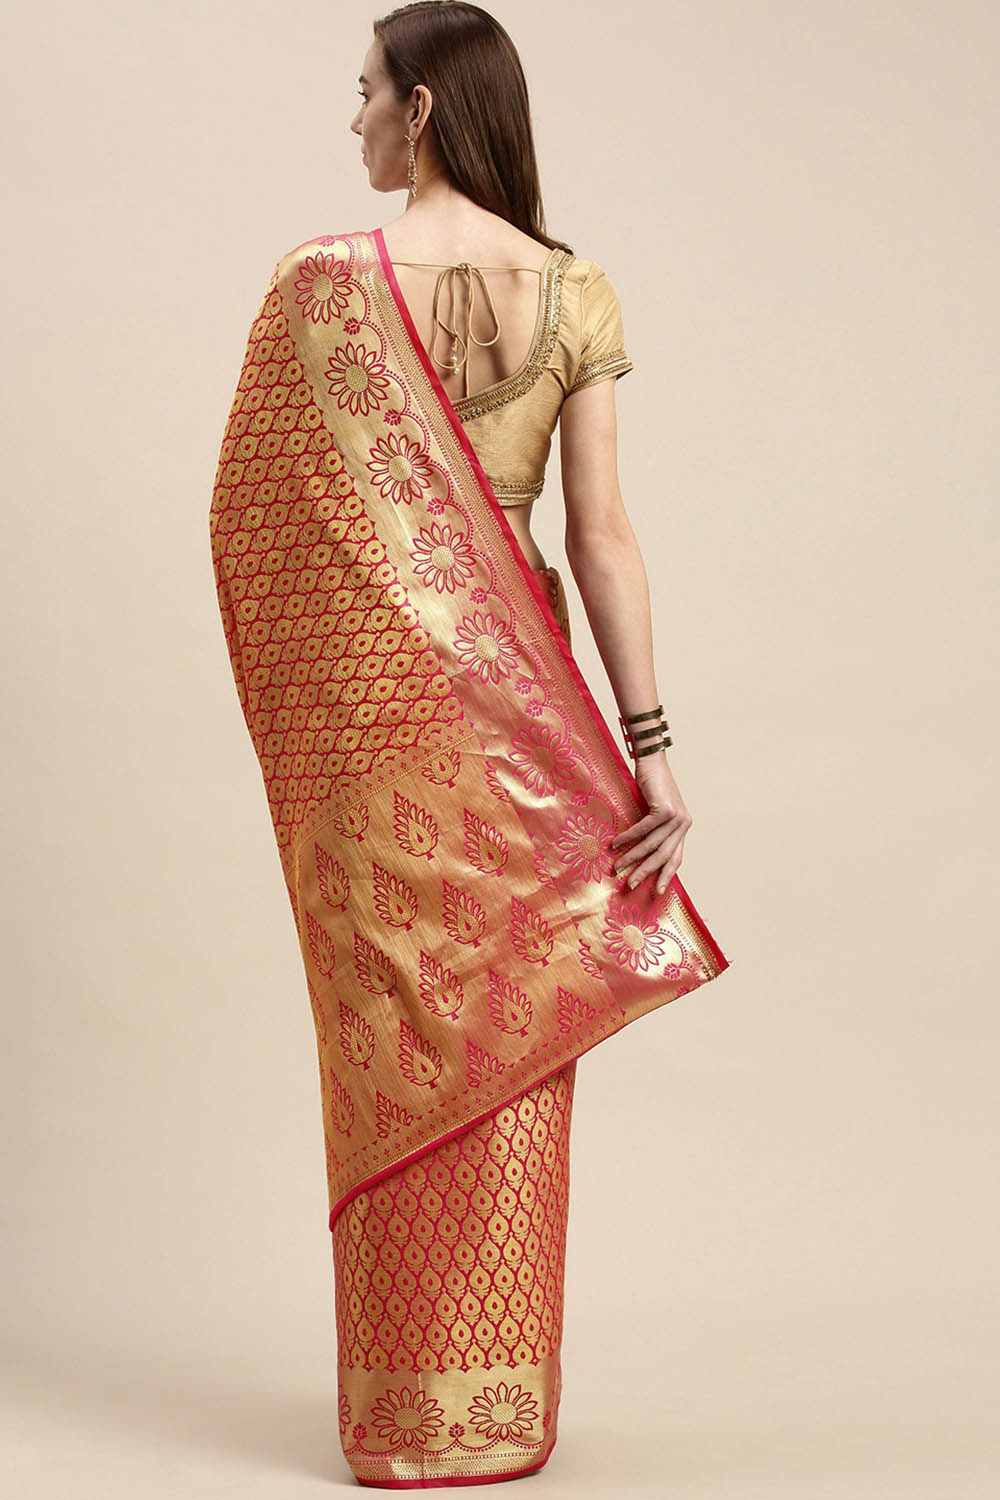 Shop Angie Orange Woven Art Silk One Minute Saree at best offer at our  Store - One Minute Saree